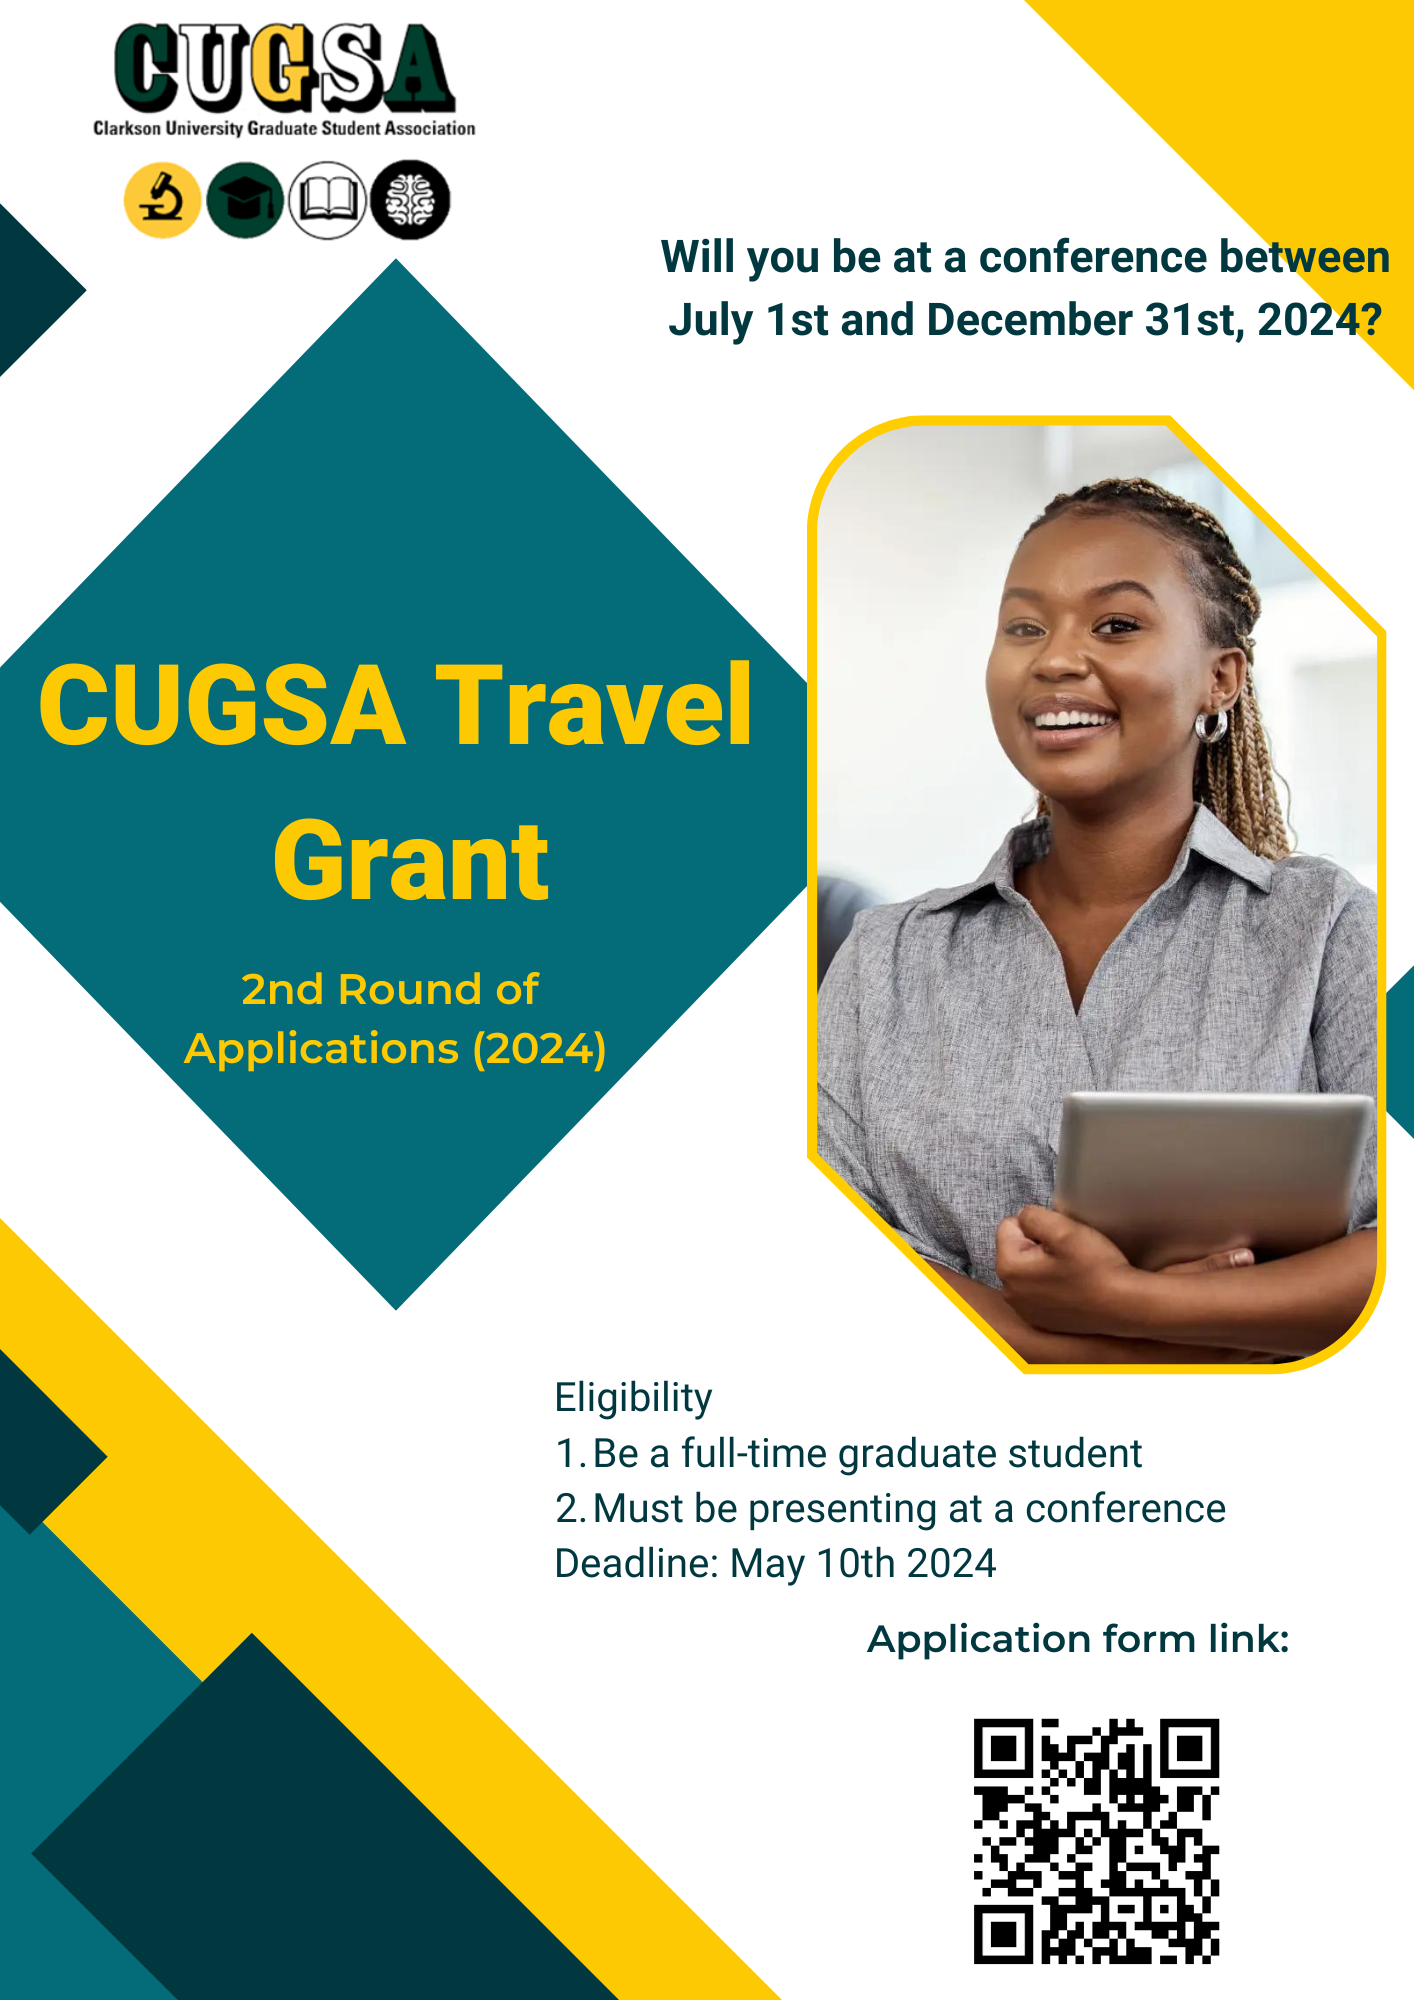 CUGSA Travel Grant for Graduate Students: 2nd Round of Applications (2024)